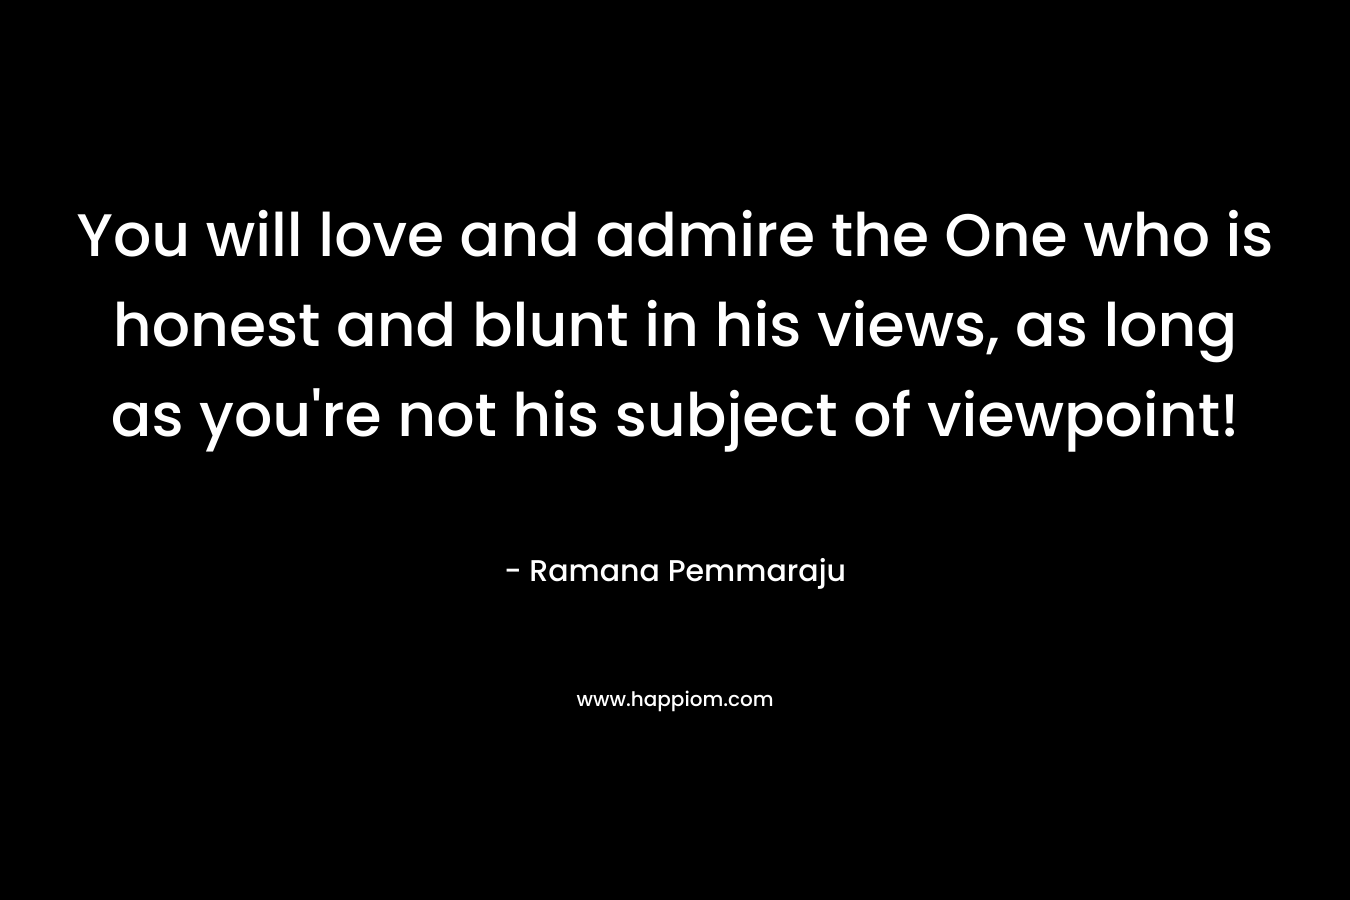 You will love and admire the One who is honest and blunt in his views, as long as you're not his subject of viewpoint!